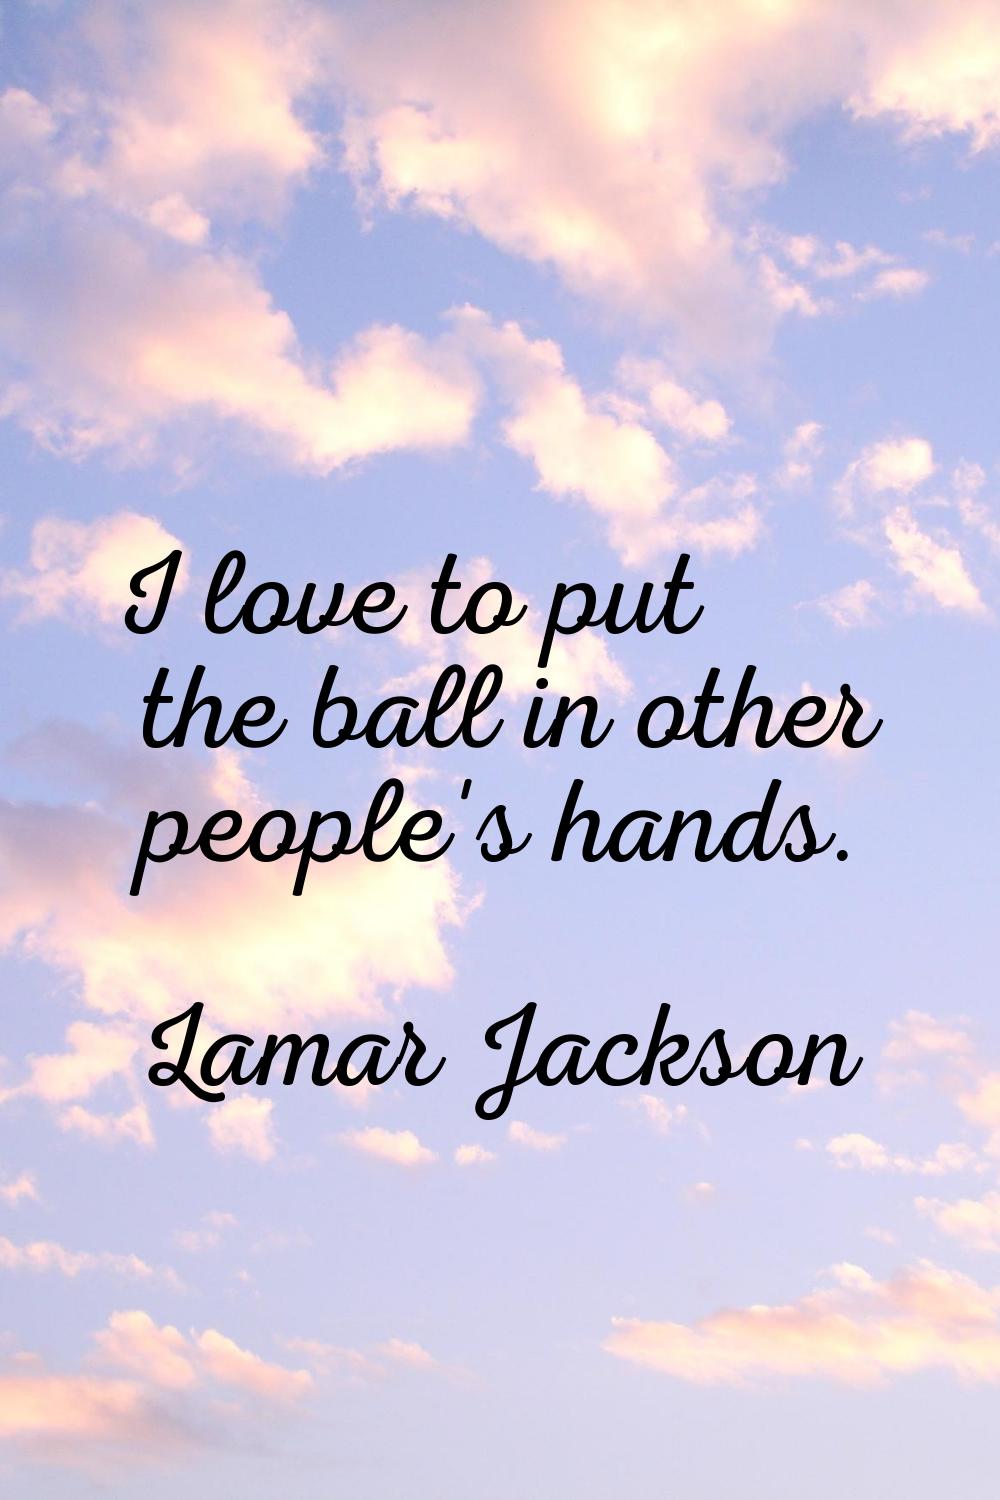 I love to put the ball in other people's hands.